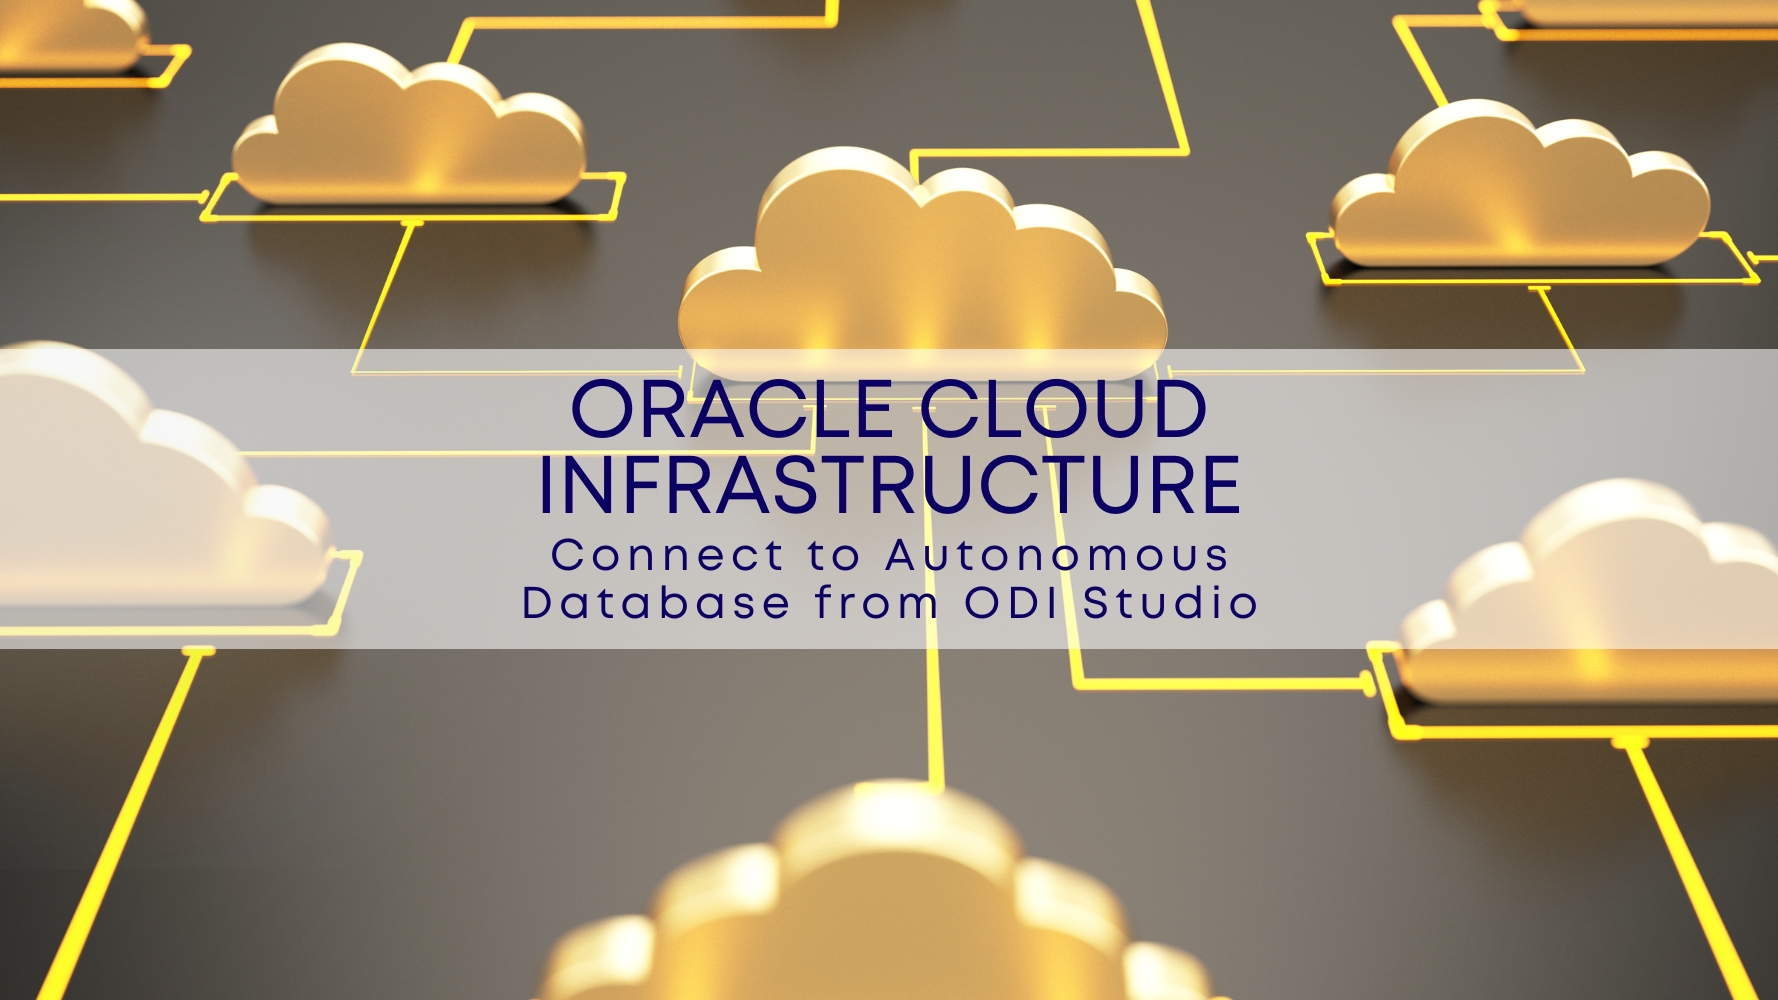 Oracle-Cloud-Infrastructure_-Connect-to-Autonomous-Database-from-ODI-Studio.jpg